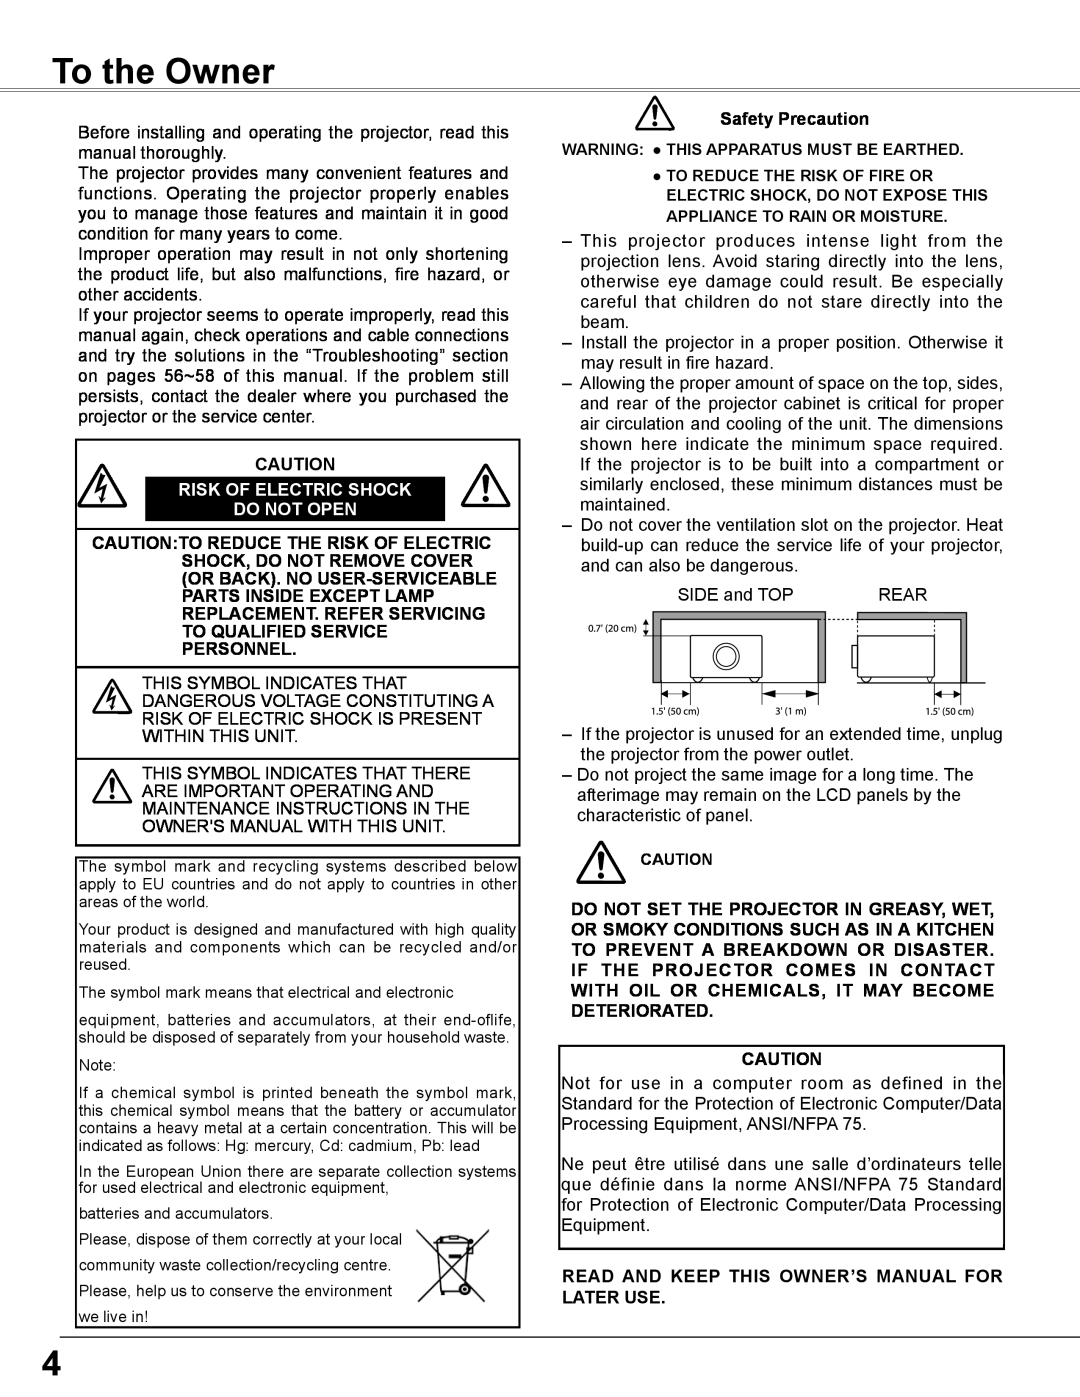 Sanyo PLC-WXE46 owner manual To the Owner, Risk Of Electric Shock Do Not Open, Safety Precaution 